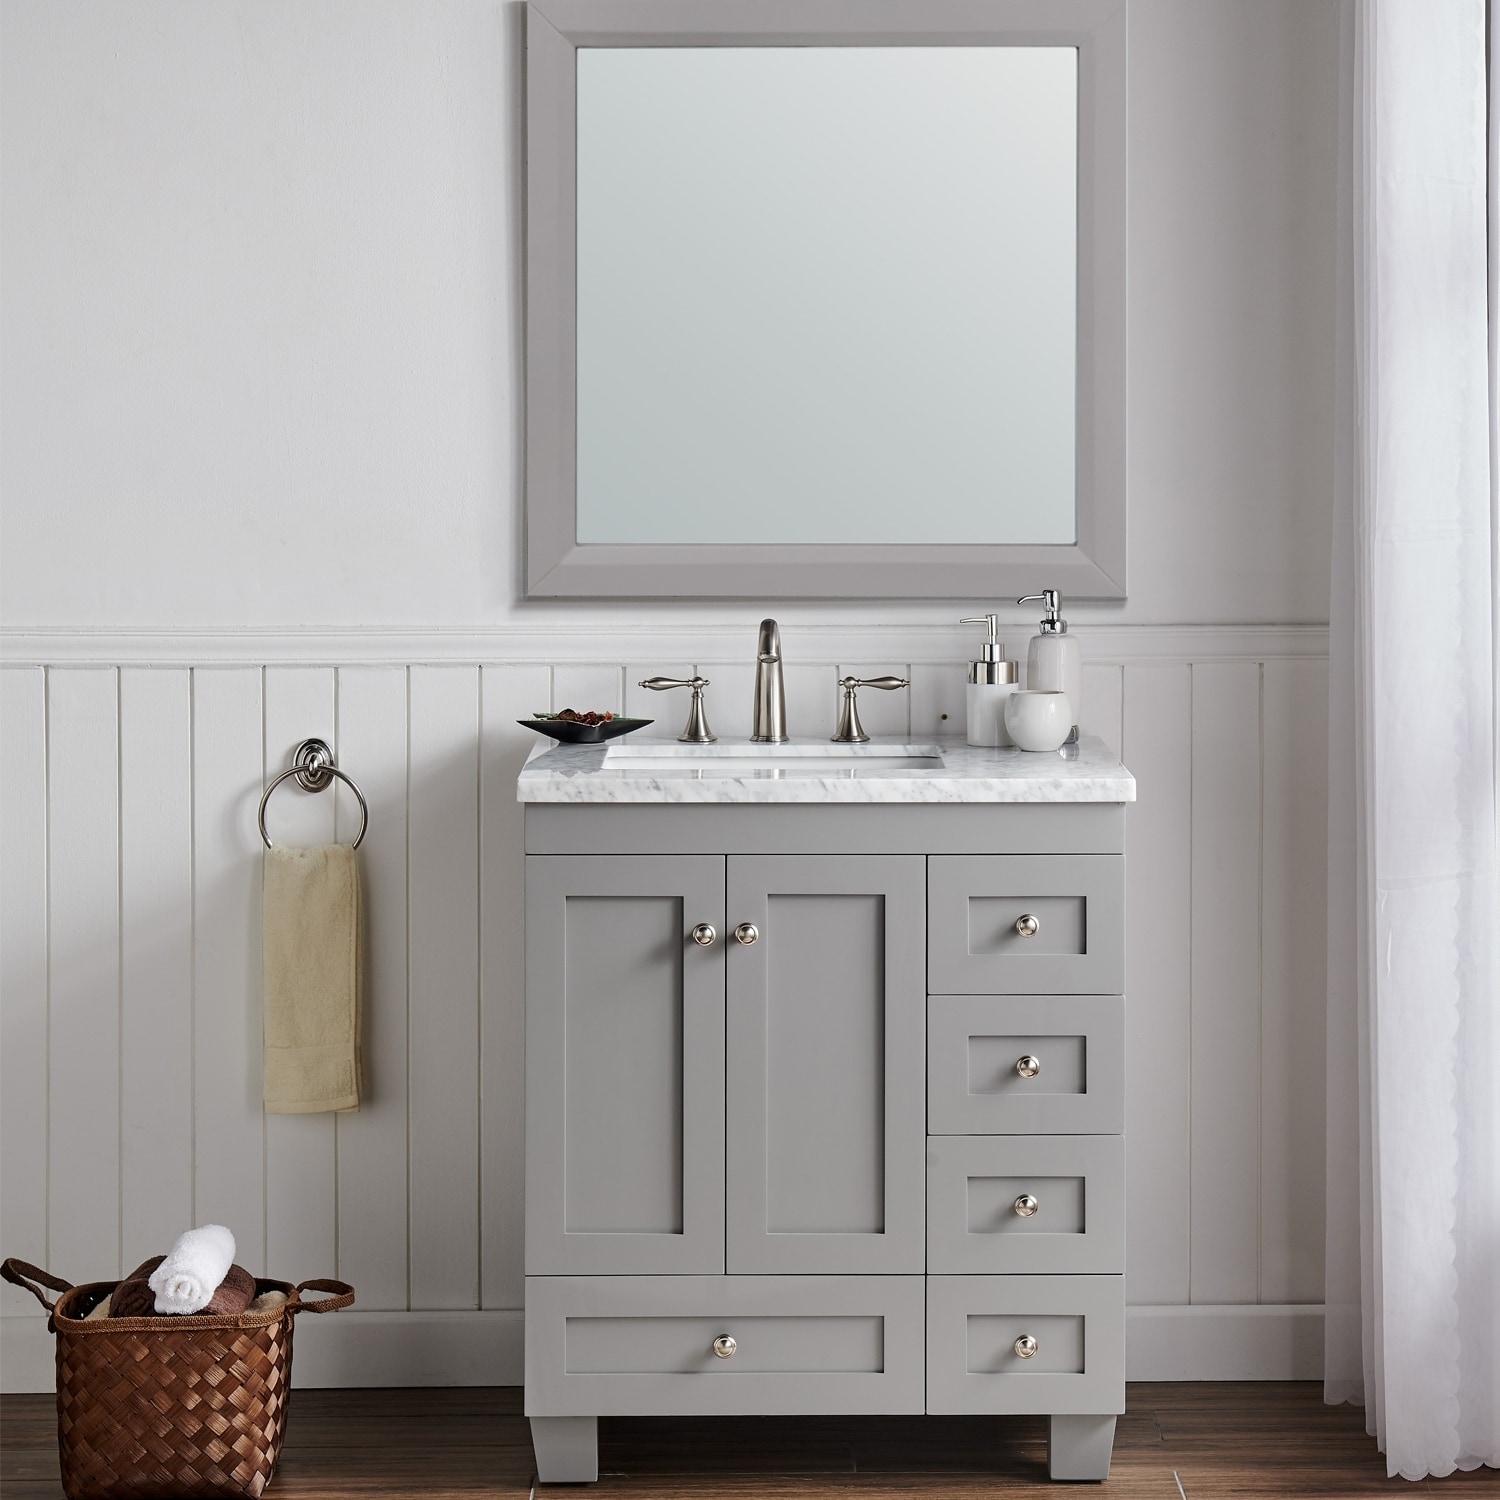 Eviva Acclaim 30 Inch Gray Transitional Bathroom Vanity With White Carrara Marble Countertop And Undermount Porcelain